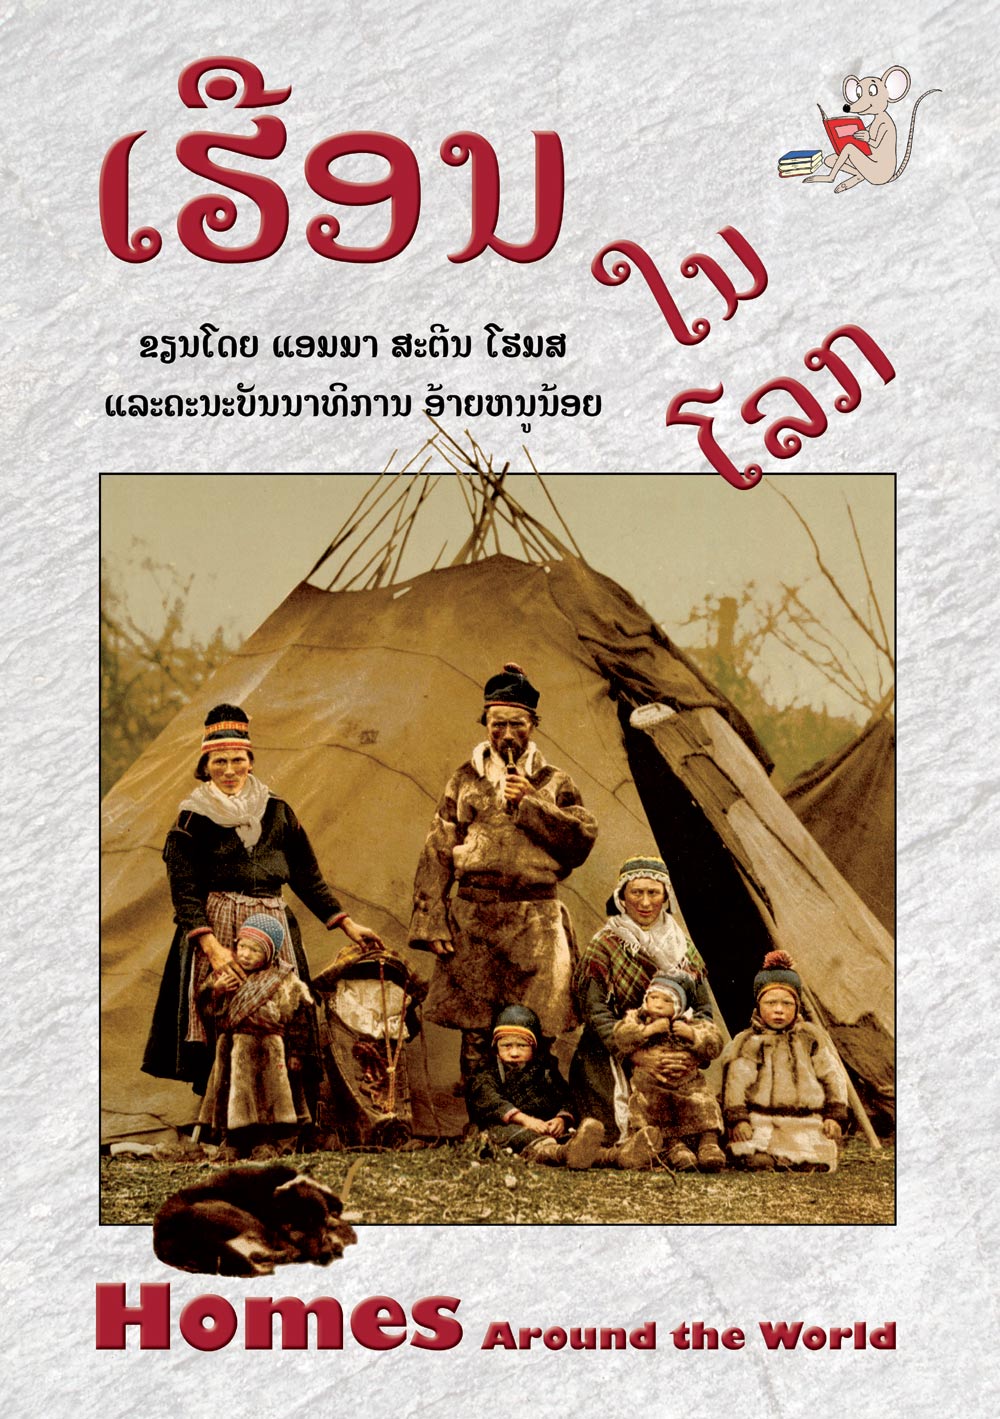 Homes Around the World large book cover, published in Lao and English